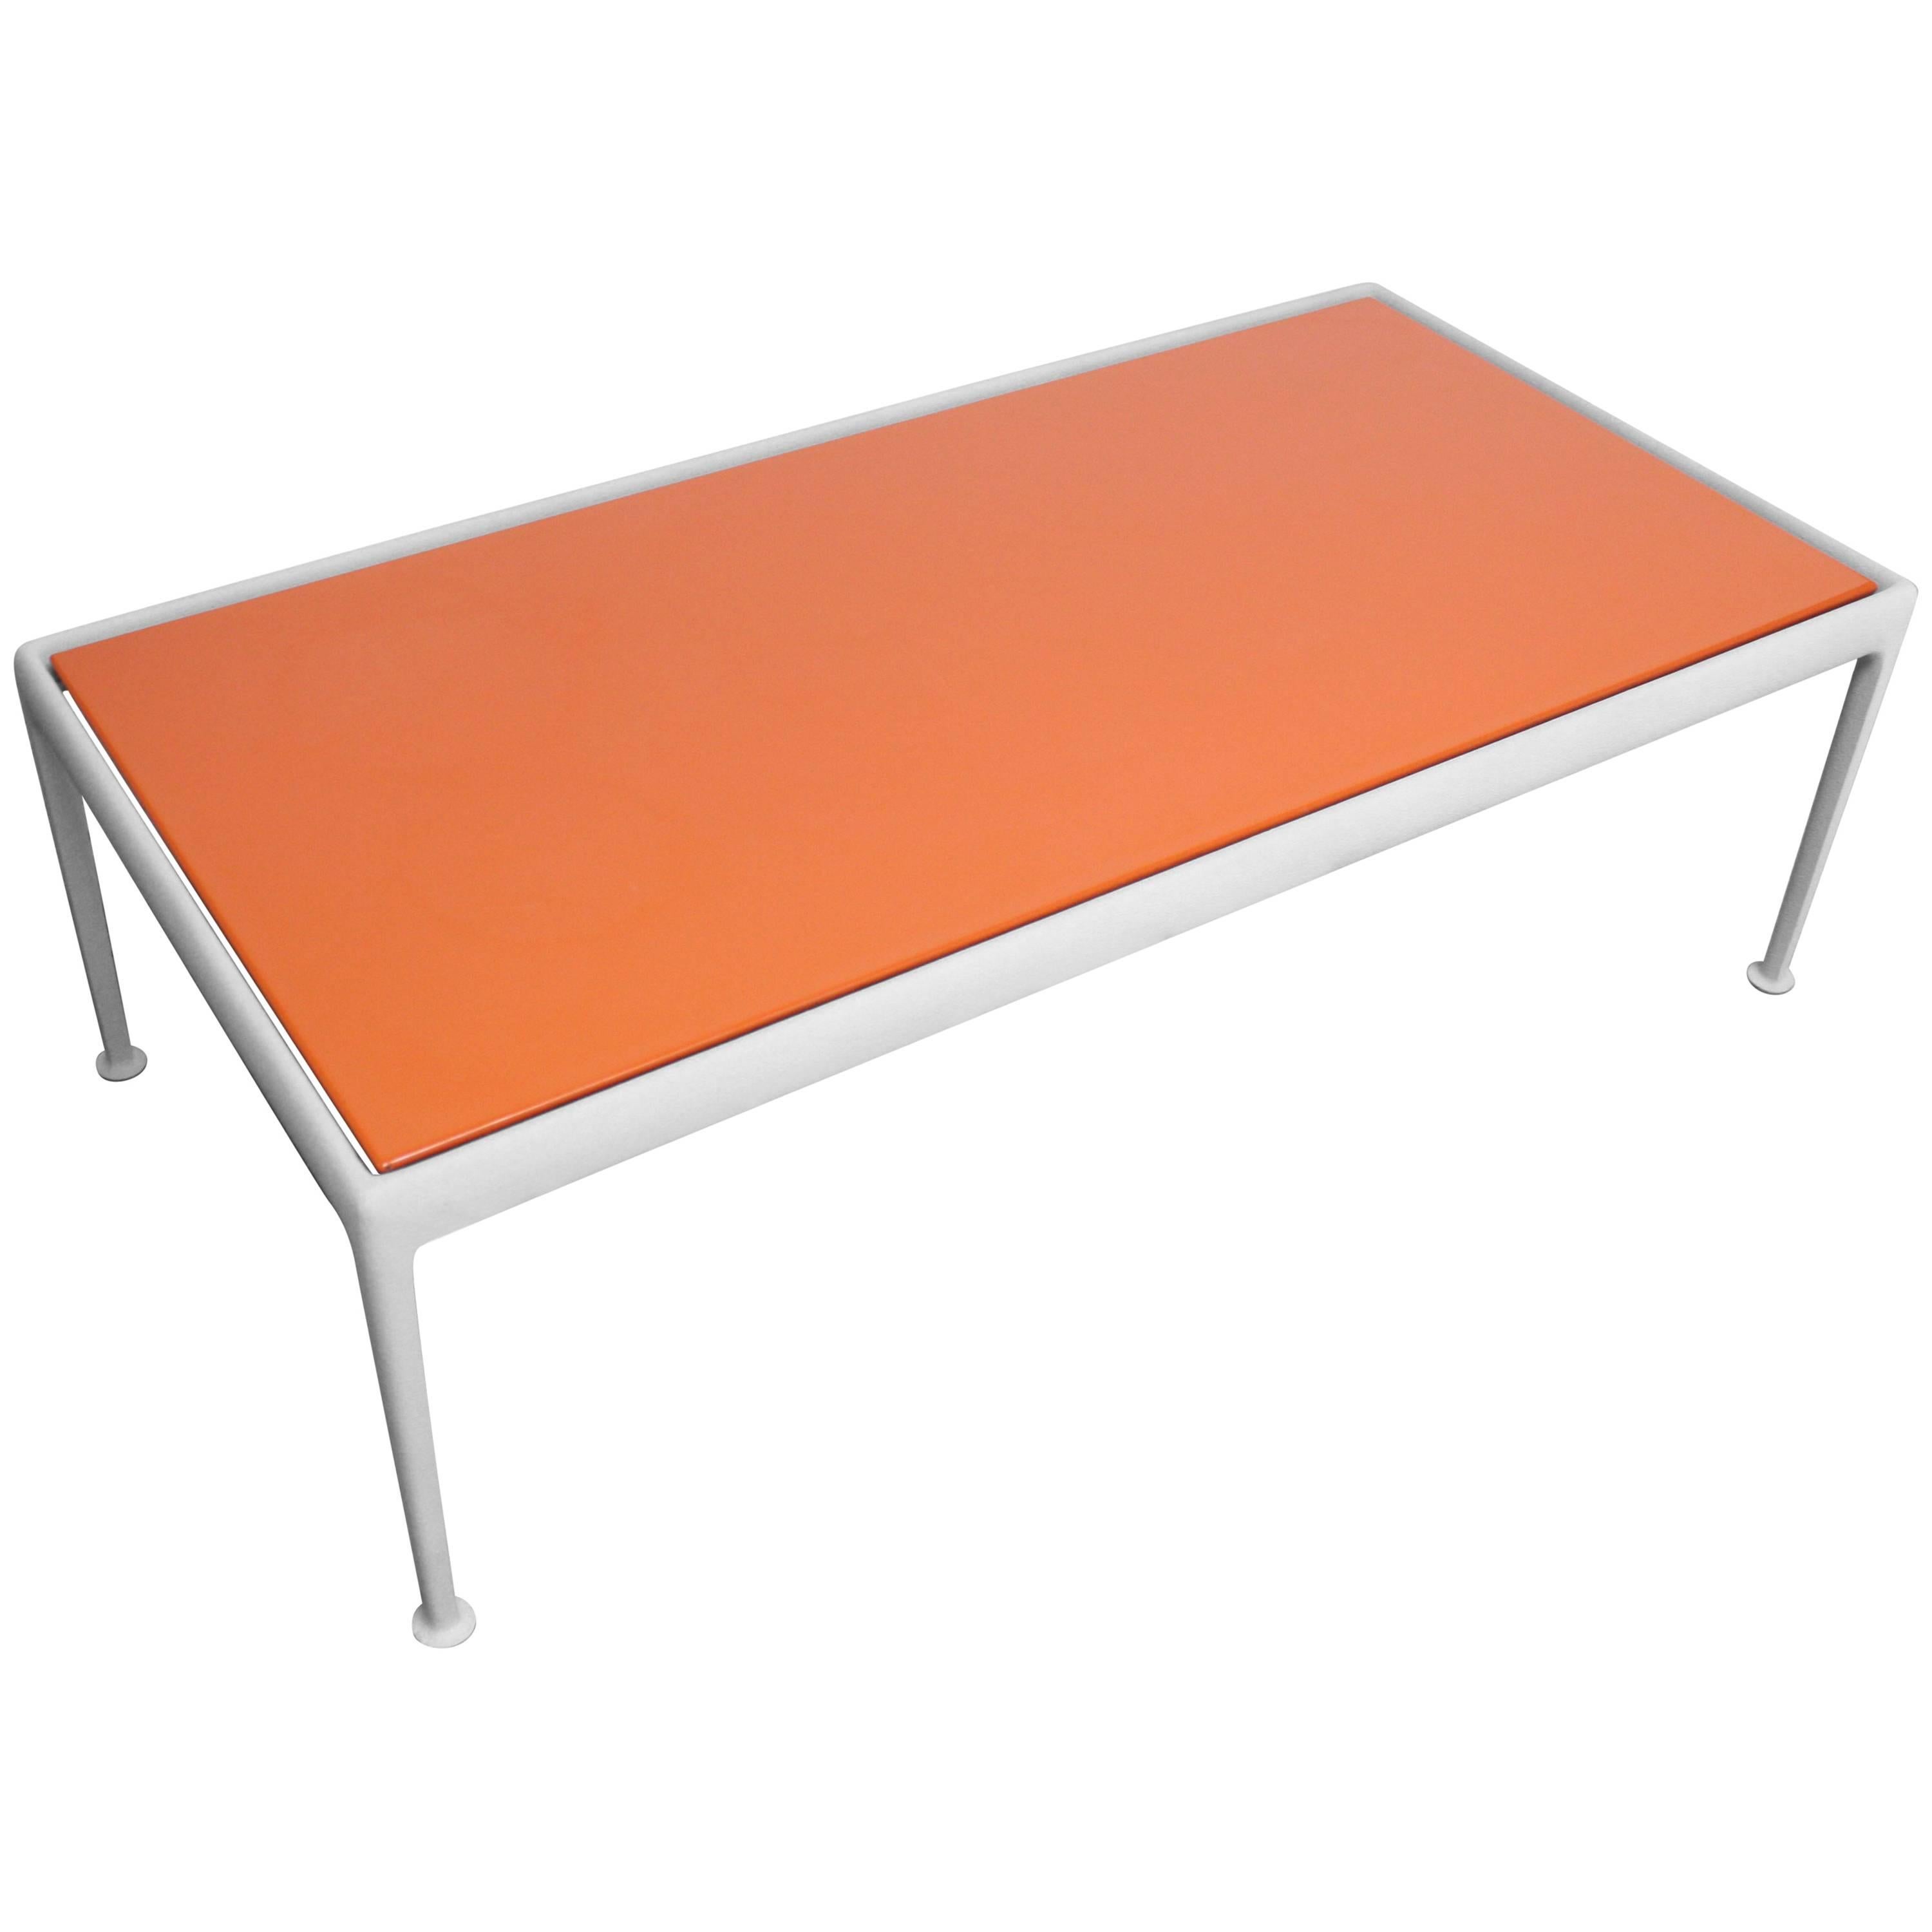 Richard Schultz for Knoll Indoor / Outdoor '1966' Series Coffee Table